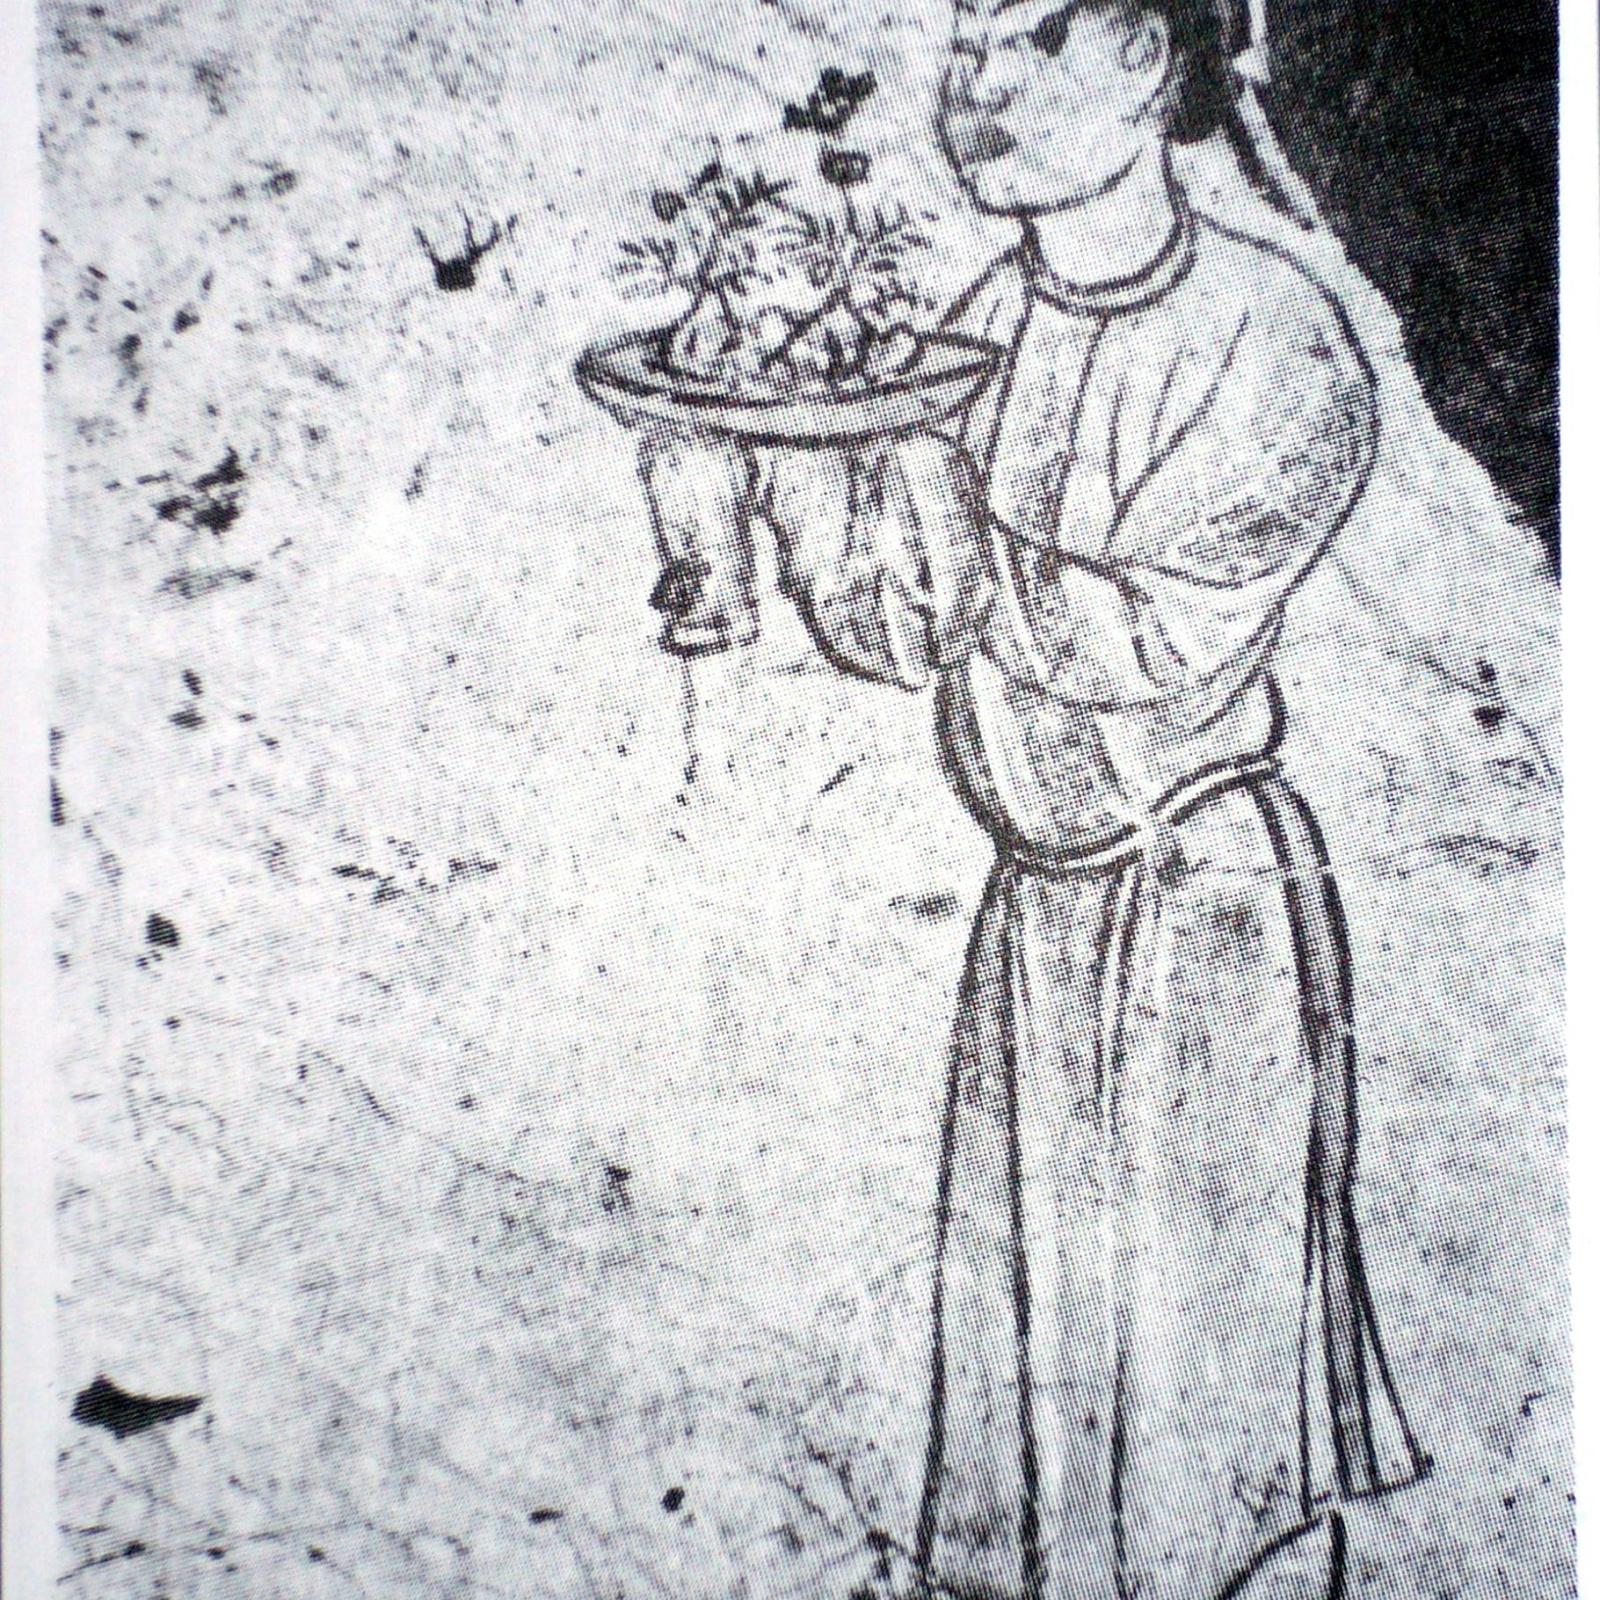 This is one of several funerary tiles showing penjing being brought as tribute, indicating they held considerable status.